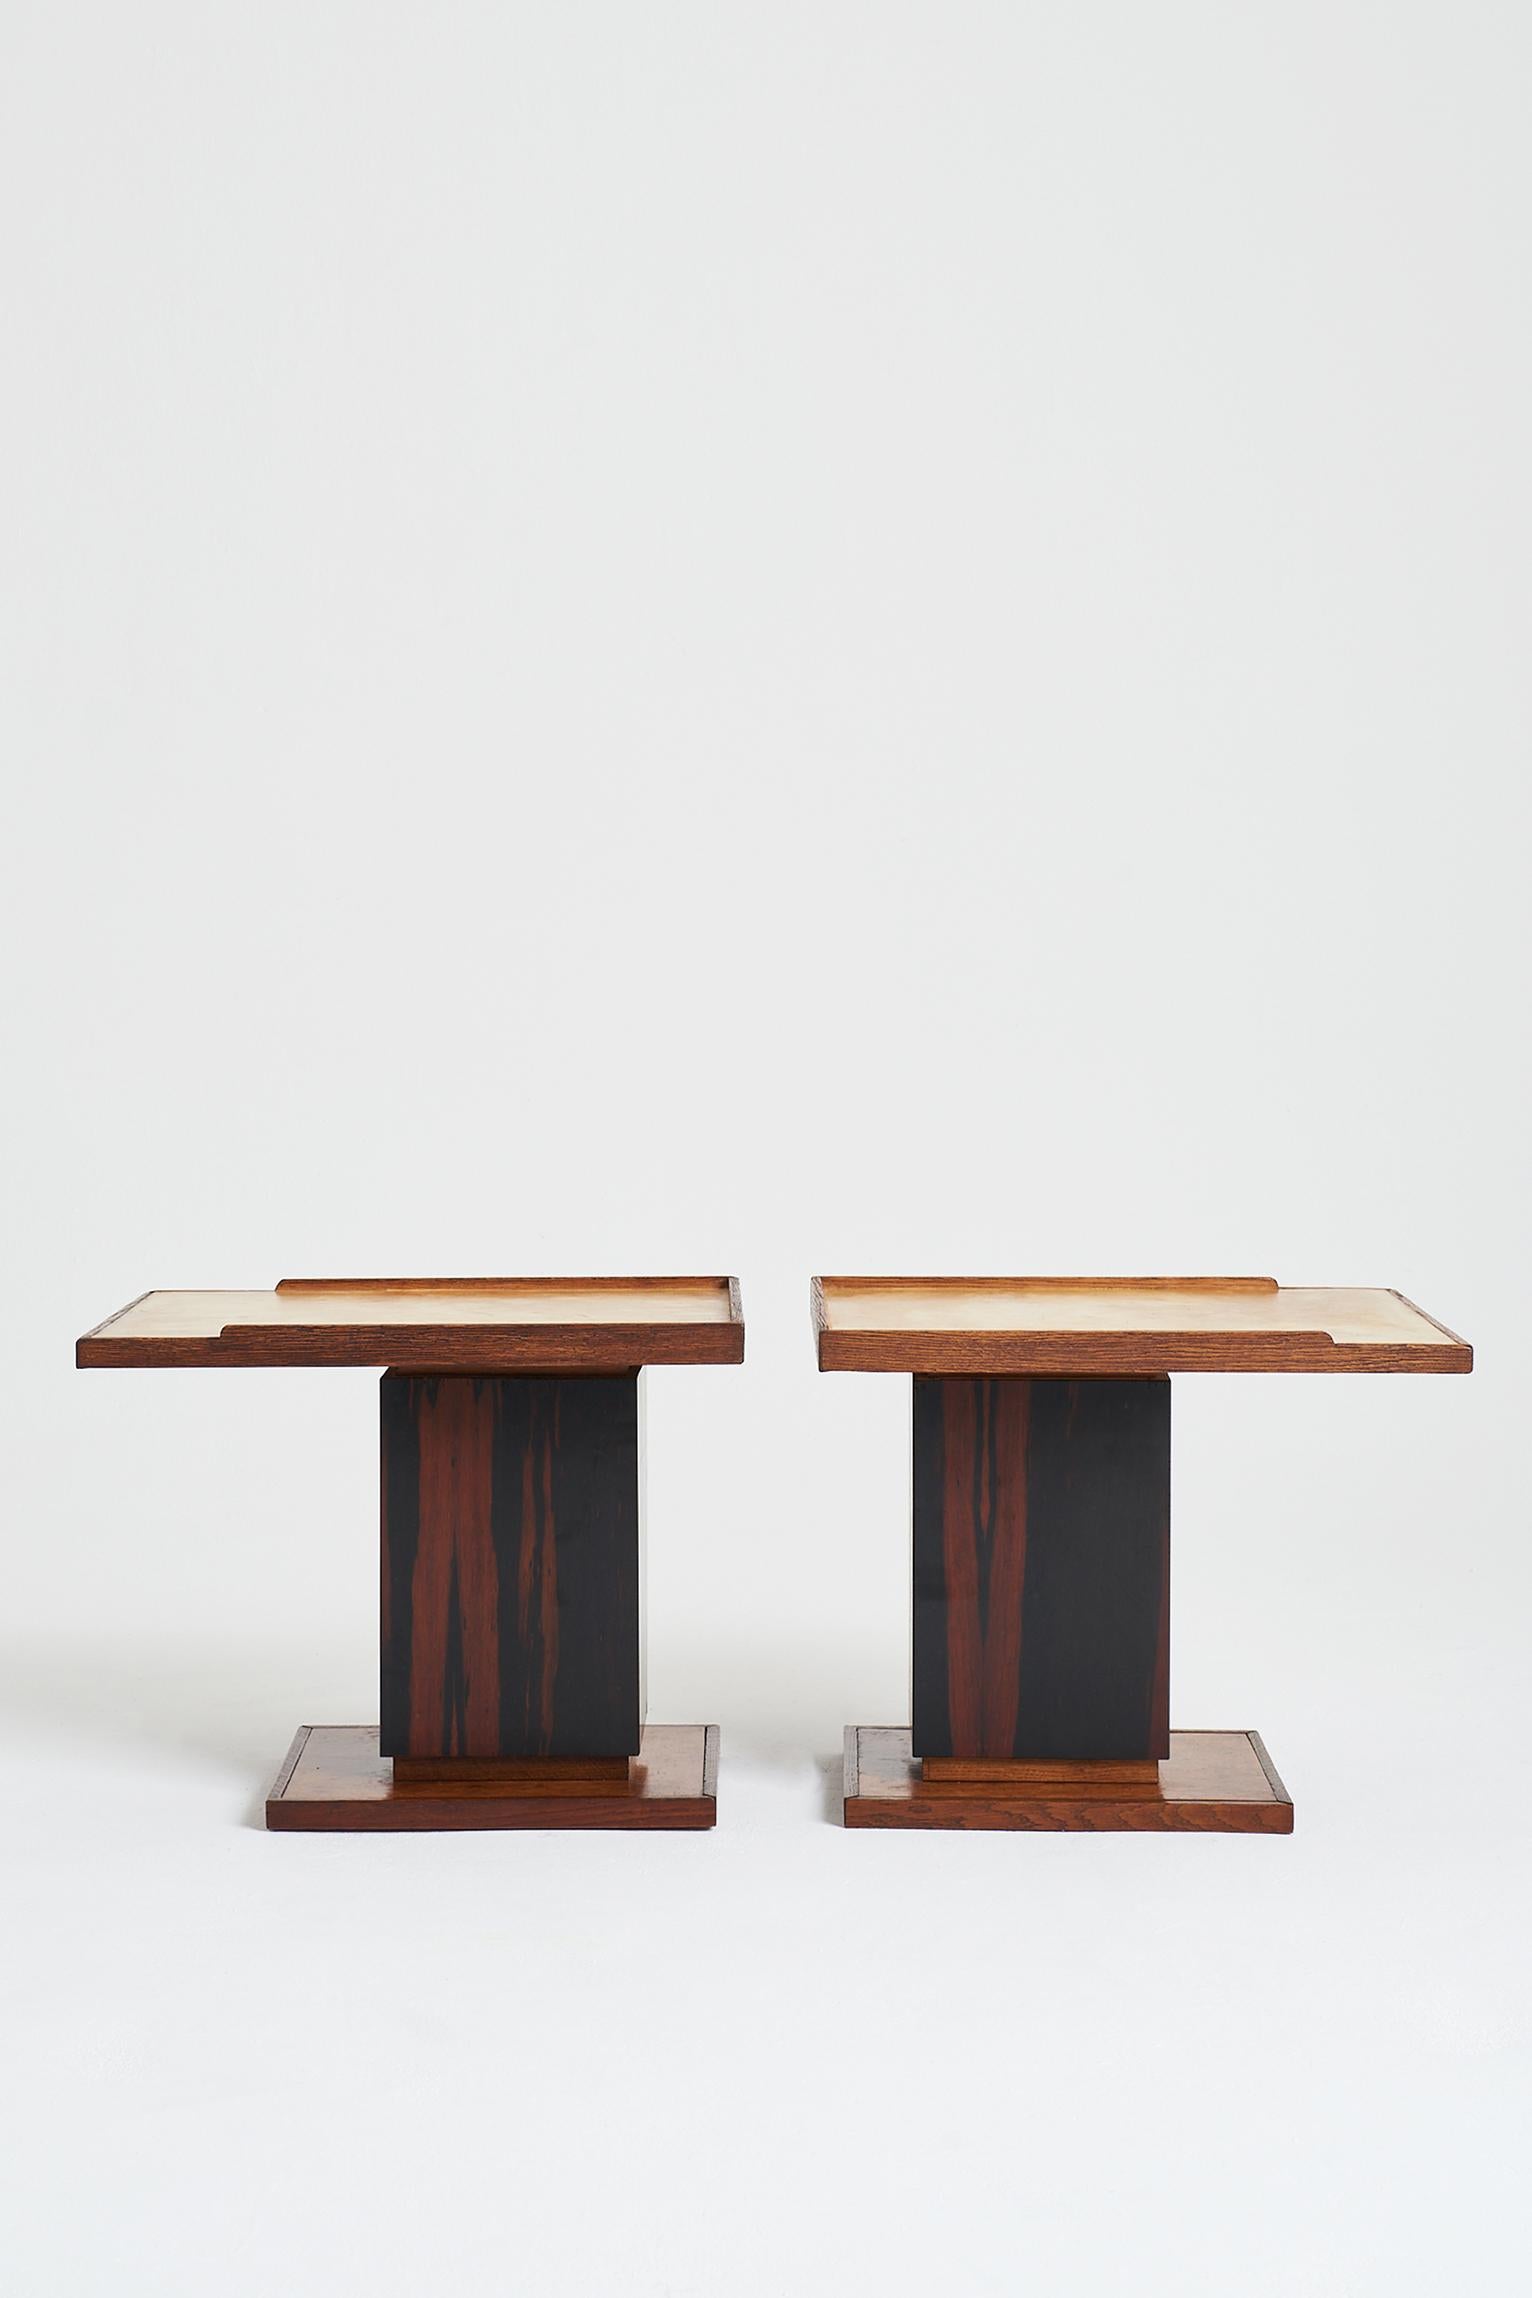 French Pair of Velum Side Tables in the manner of Paul-Dupré Lafon